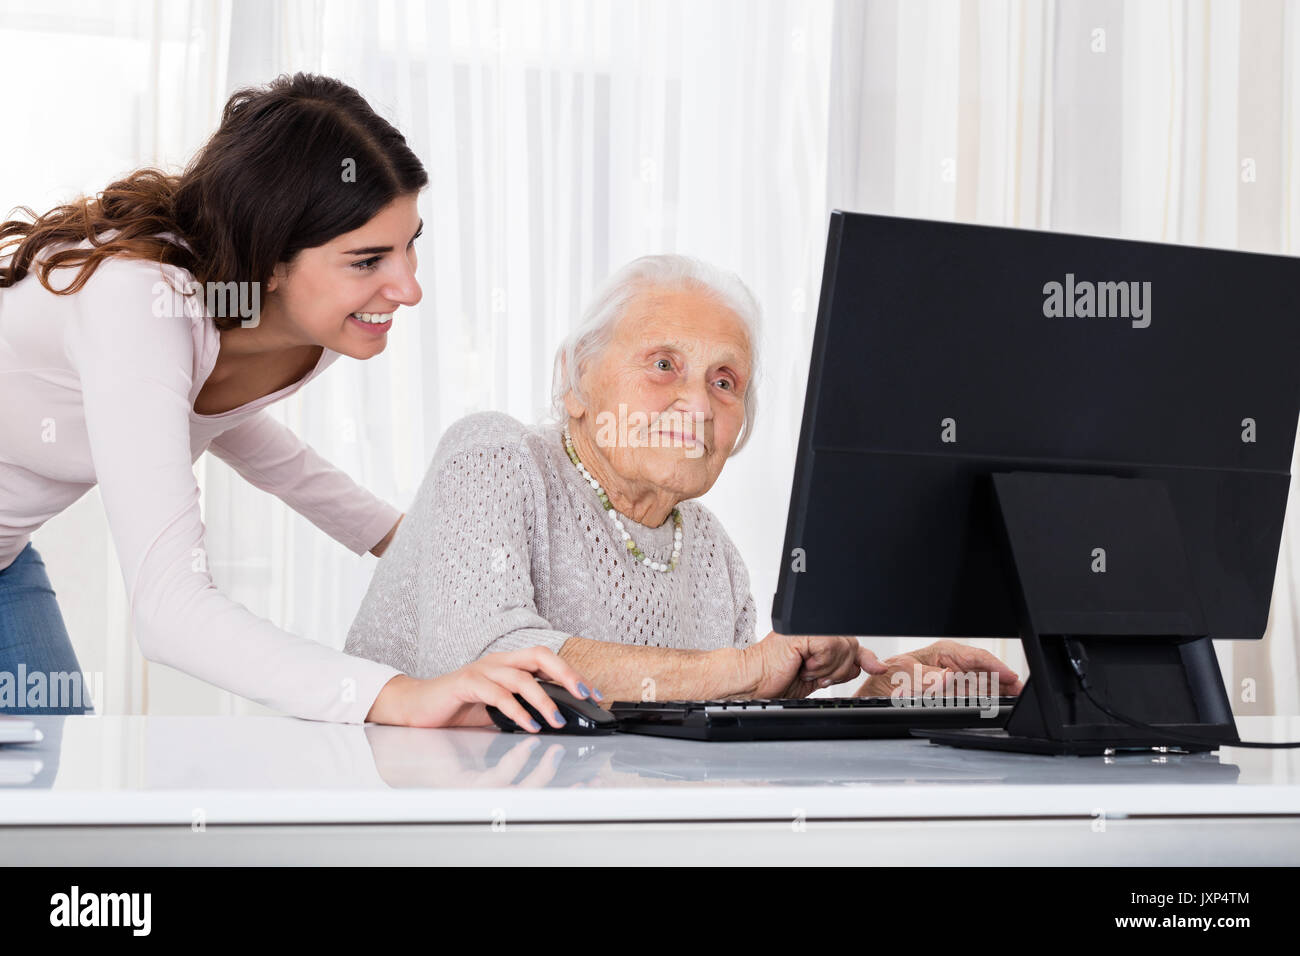 Young Woman Helping Her Grandmother For Using A Laptop On Desk At Home Stock Photo